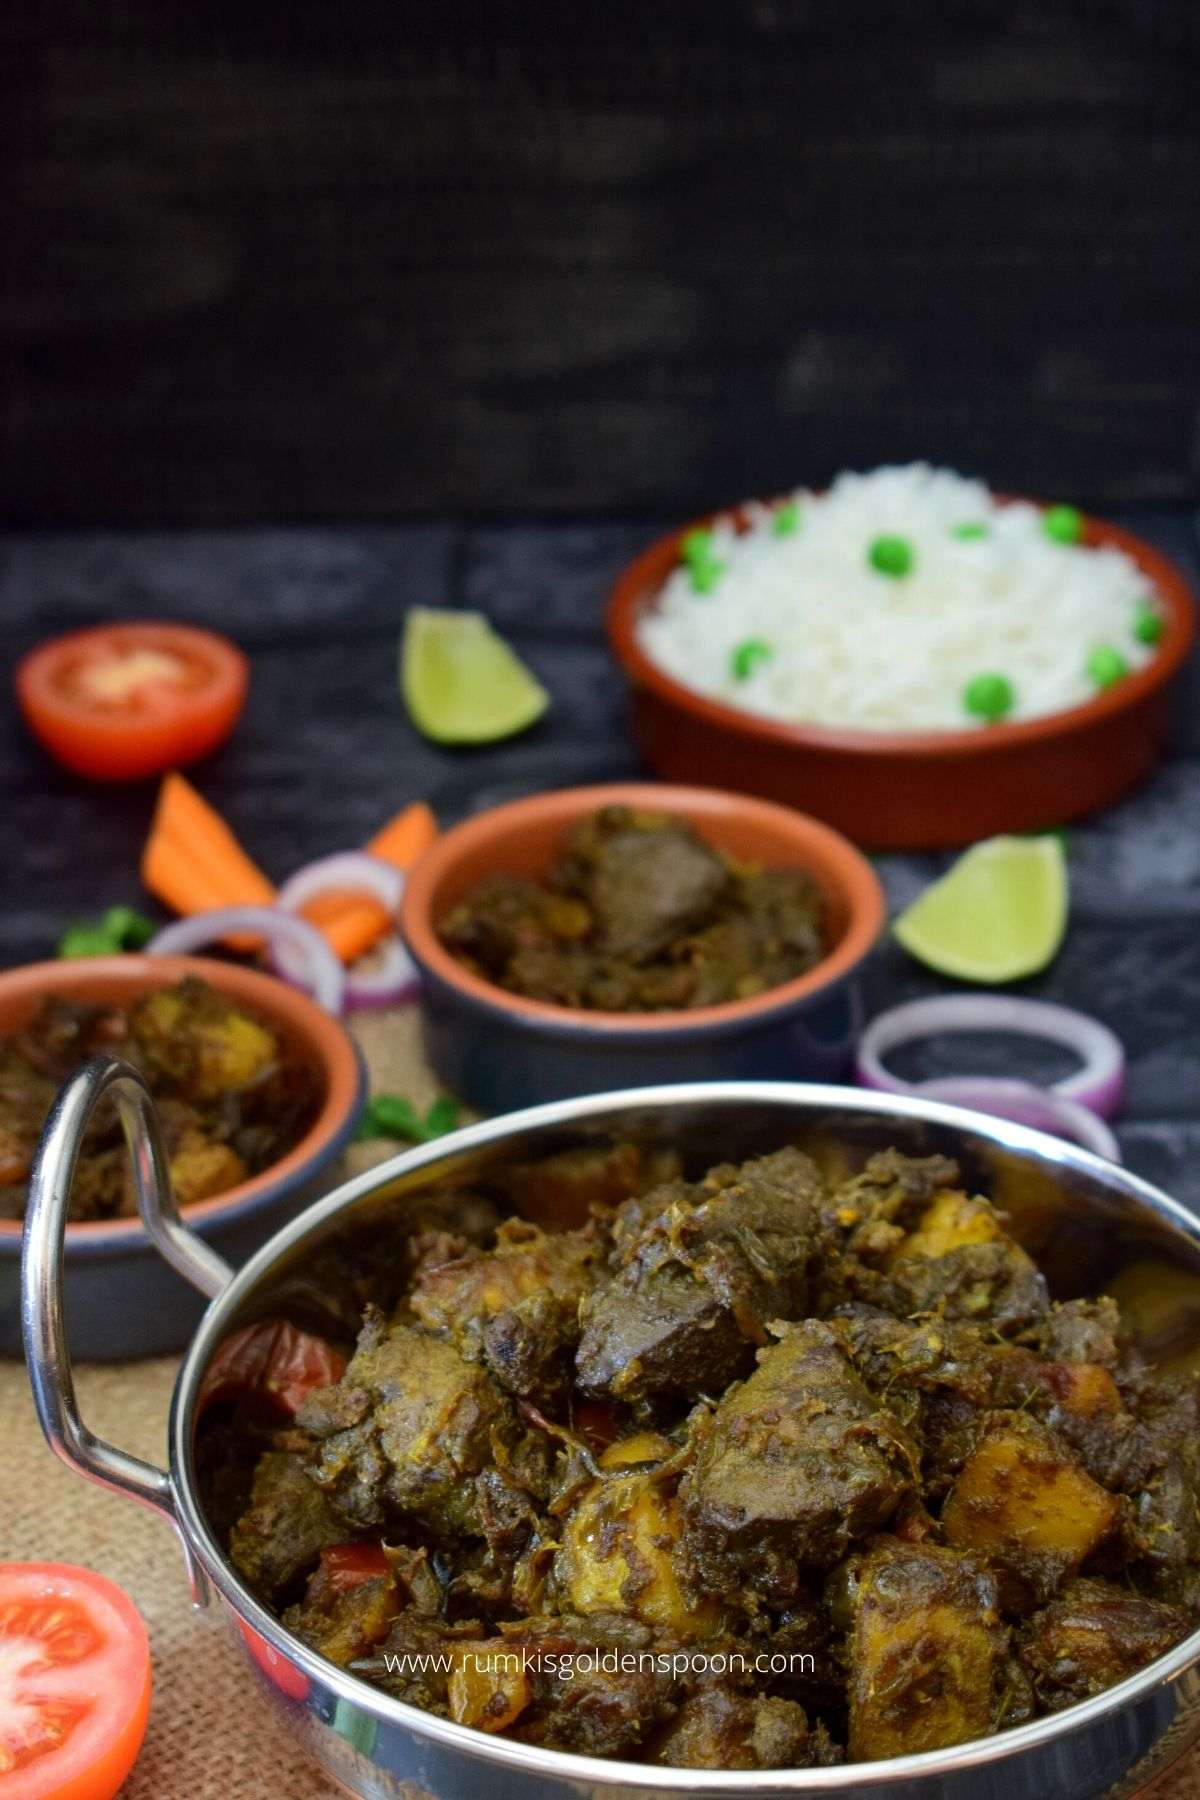 mutton liver curry, mutton liver curry recipe, mete chorchori, mete chorchori recipe, recipe of mutton liver curry, mete chorchori bengali recipe, mutton liver curry recipe bengali, how to cook mutton liver curry, lamb liver curry, lamb liver stir fry, mutton mete chorchori, mete chorchori meaning, bengali recipes, bengali food, traditional bengali food, Rumki's Golden Spoon